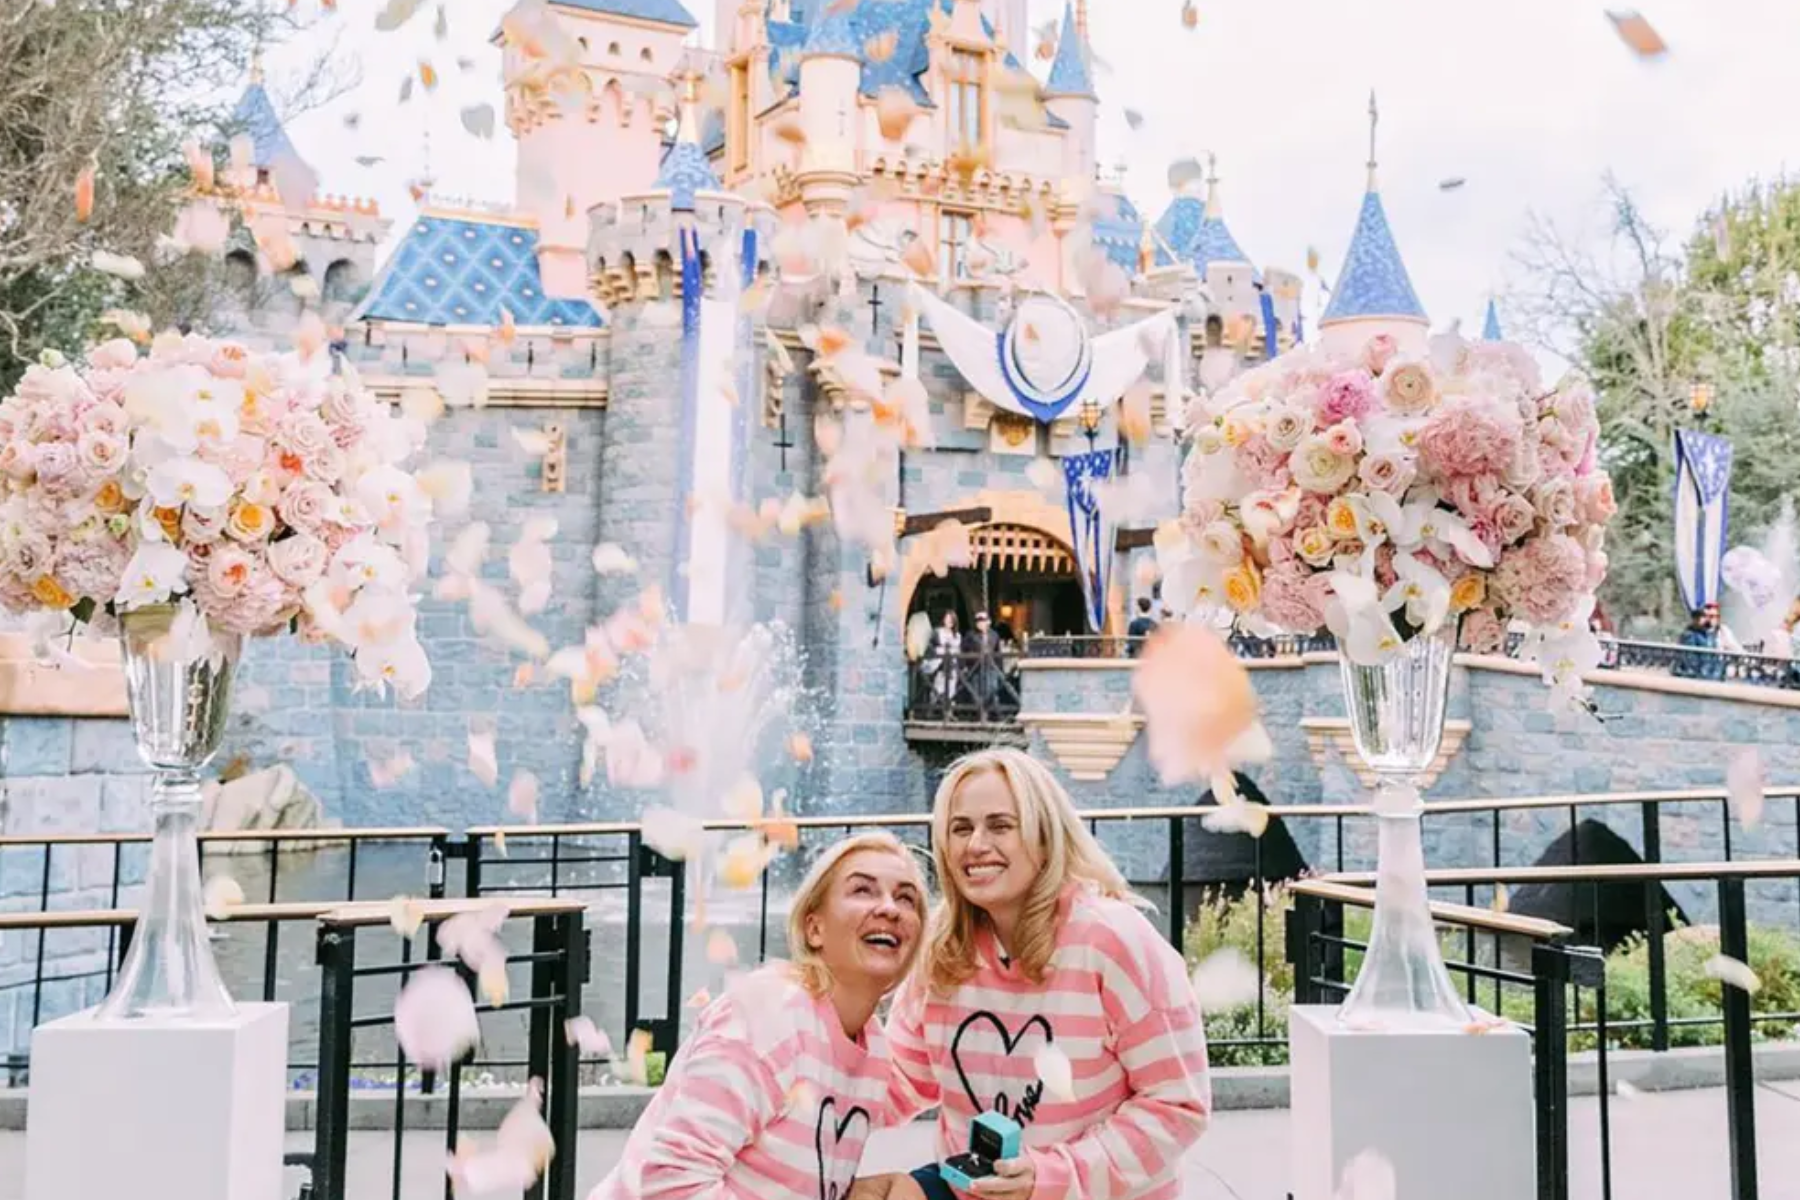 The couple got engaged during a Disneyland trip